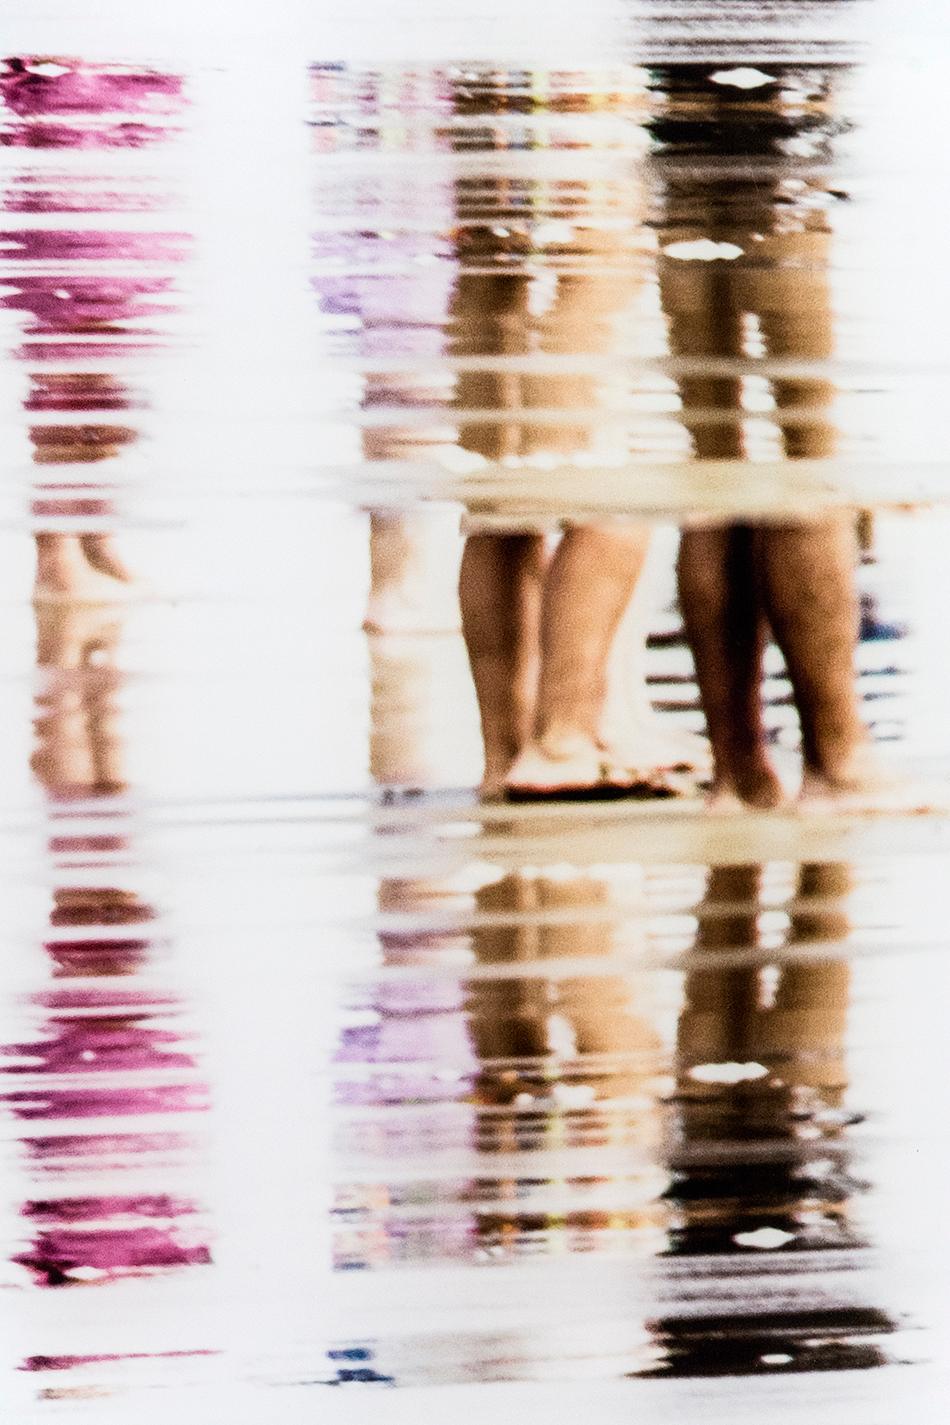 Duplication - white, pink, abstract figurative, landscape, photography on dibond - Contemporary Photograph by Mark Bartkiw